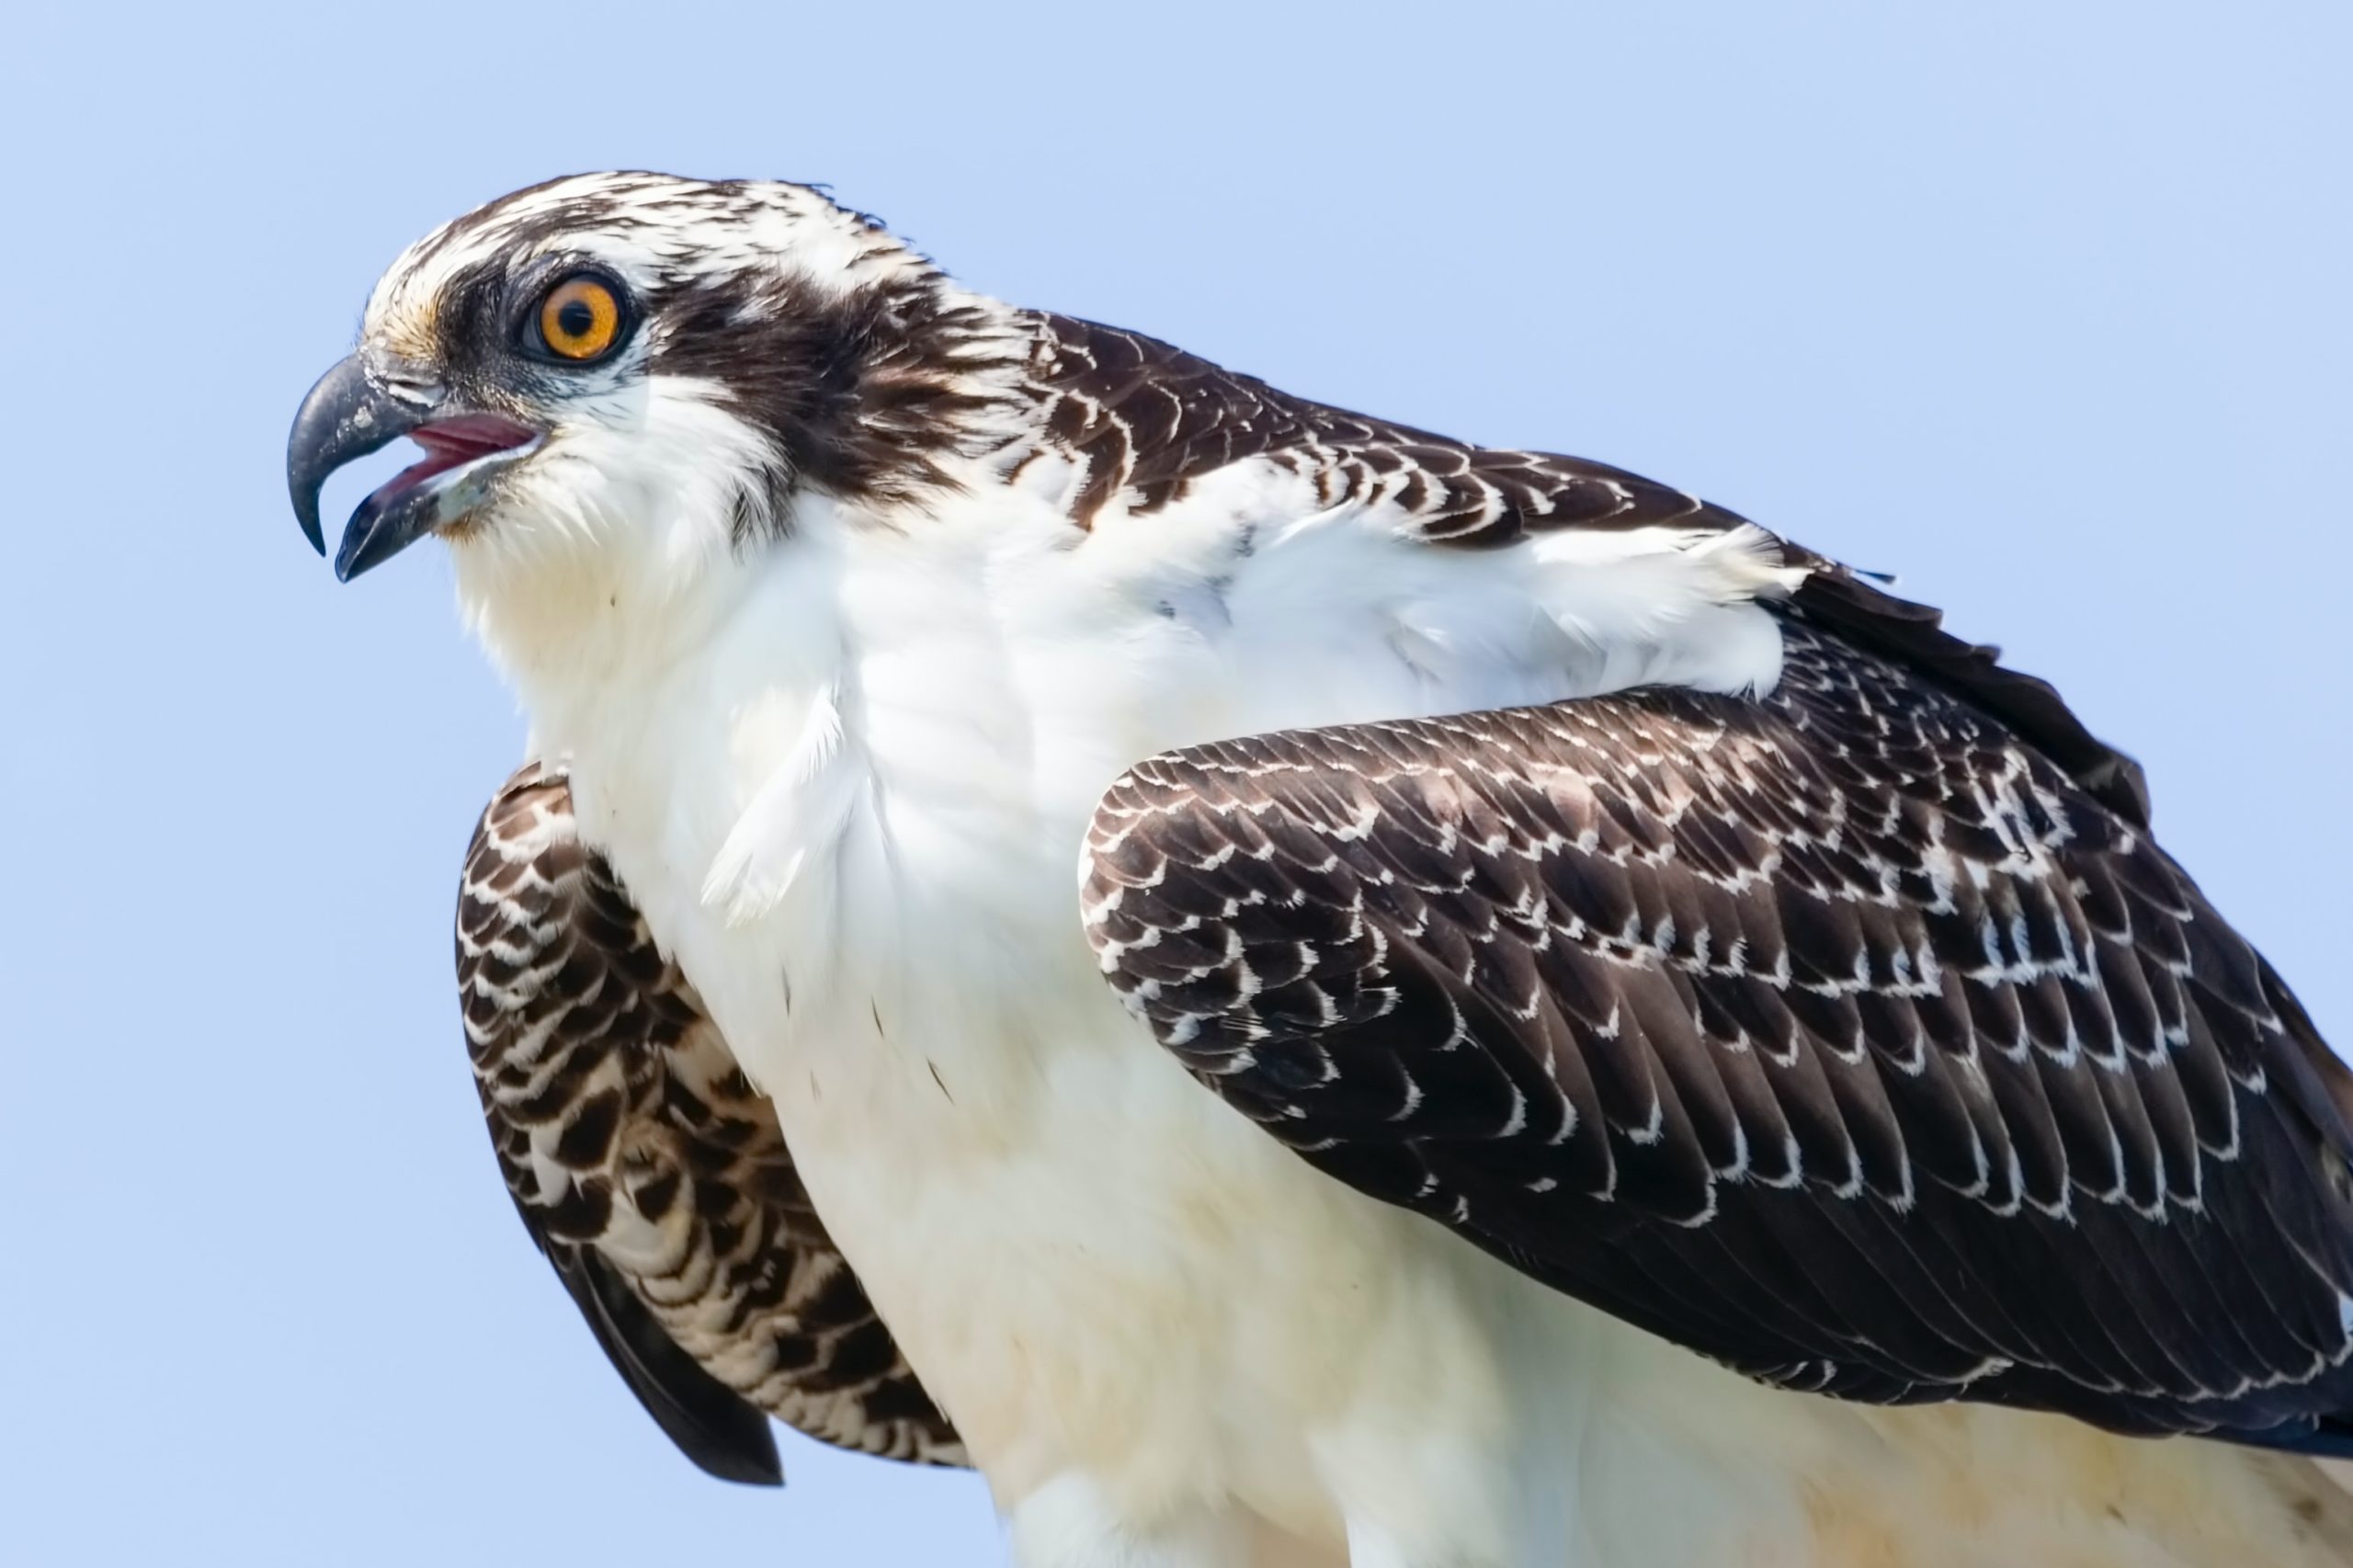 What is an osprey and what does it have to do with reality TV?